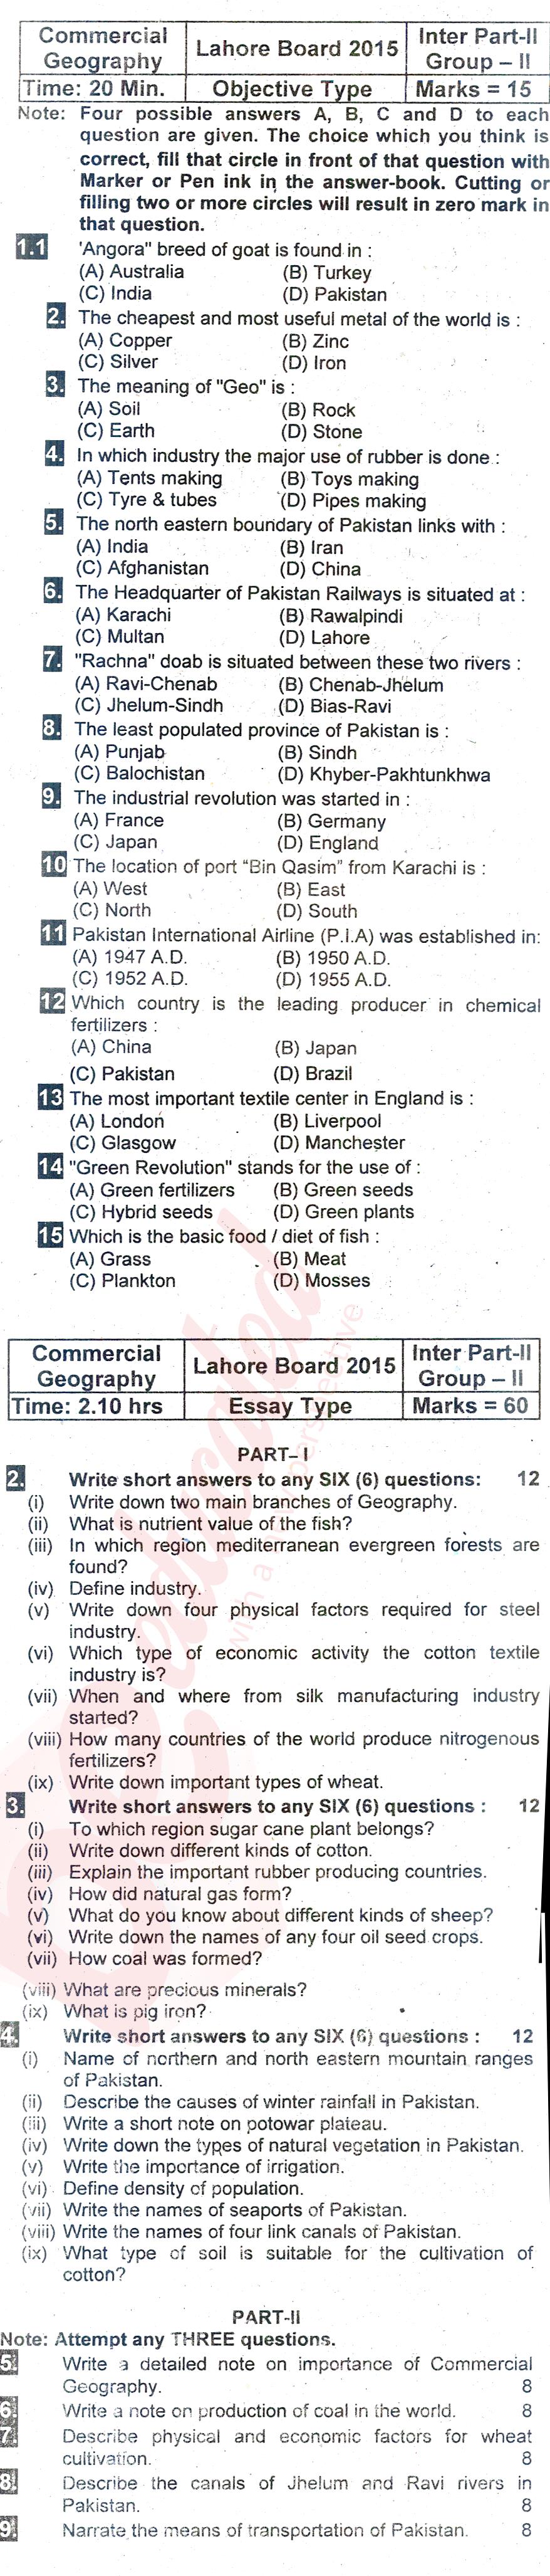 Commercial Geography ICOM Part 2 Past Paper Group 2 BISE Lahore 2015